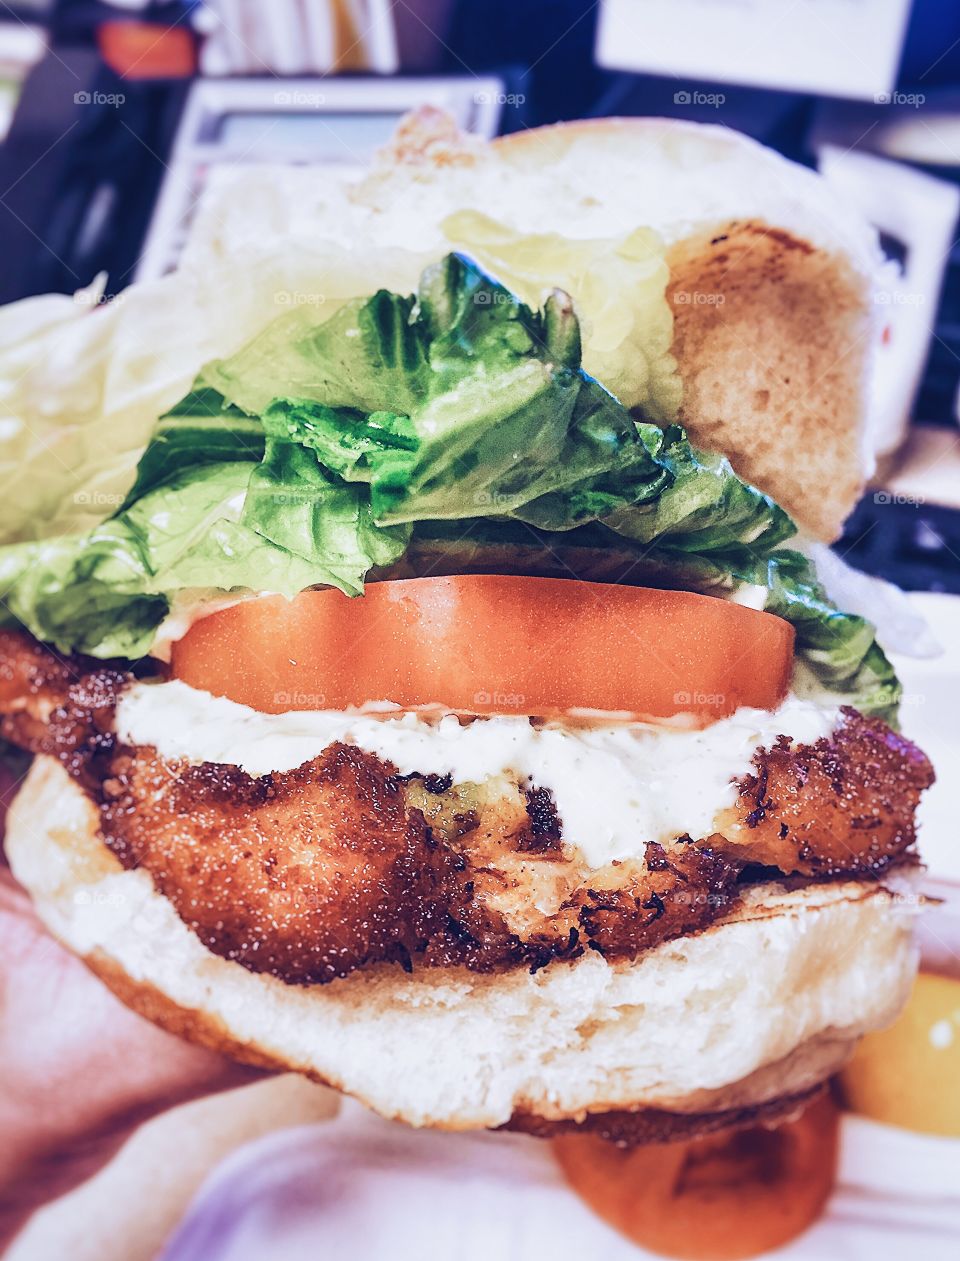 To satisfy the fat kid in all of us, crab cake sandwiches are essential. Before it was lunch, this crab was trying to keep Ariel away from the shore. 